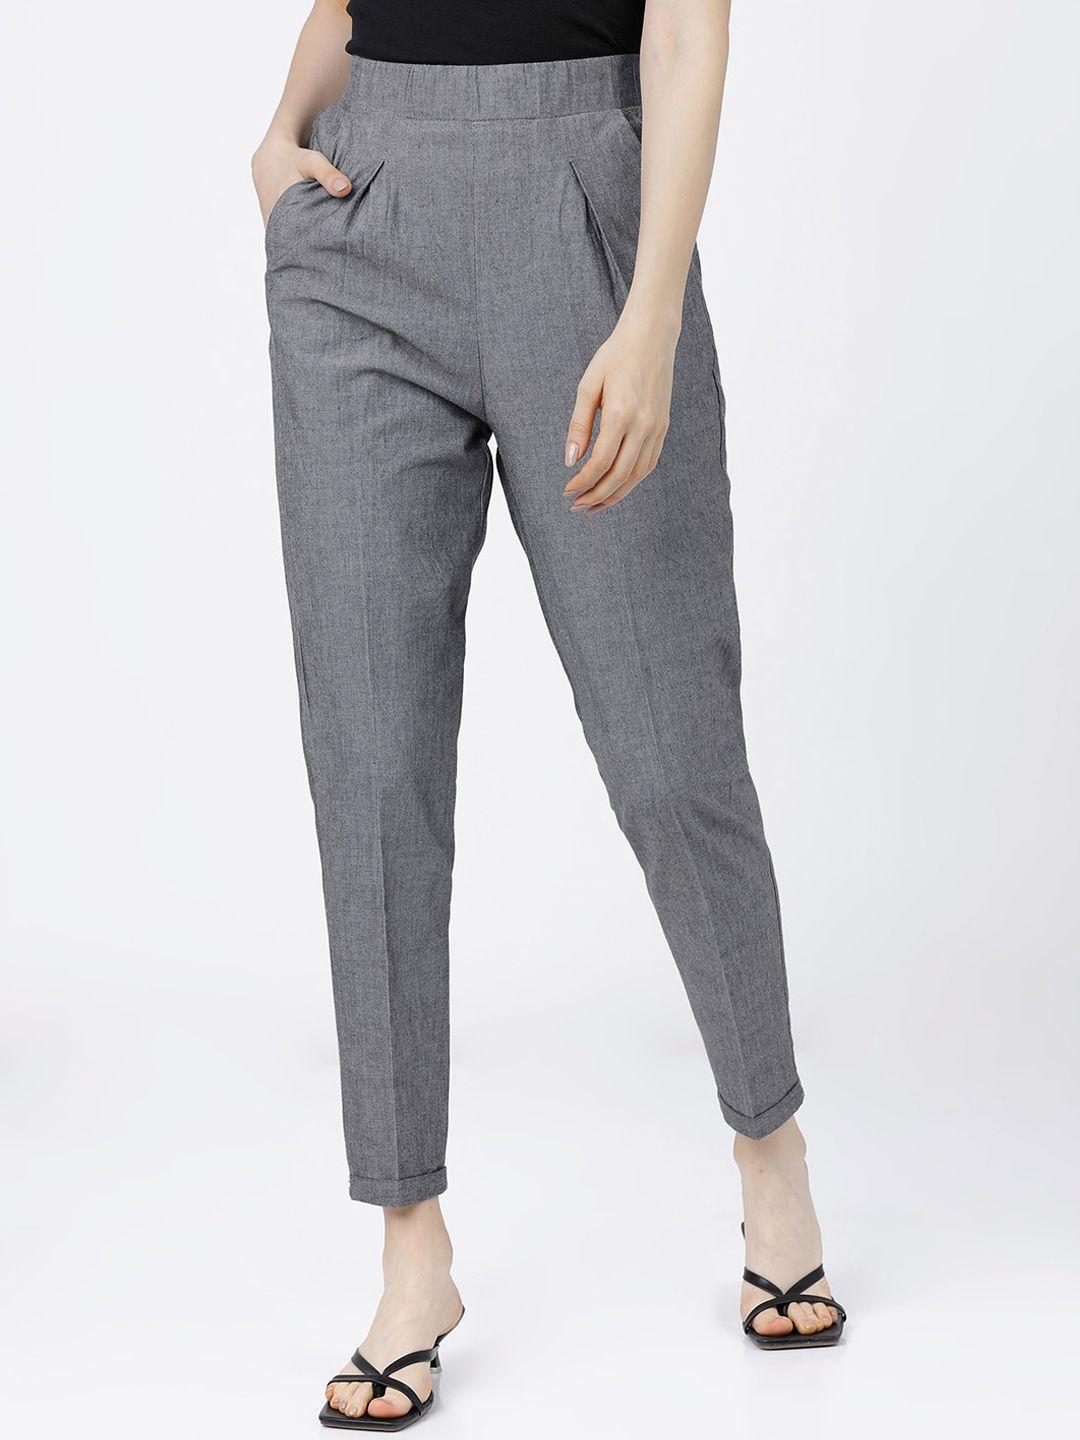 tokyo-talkies-women-grey-tapered-fit-pleated-peg-trousers